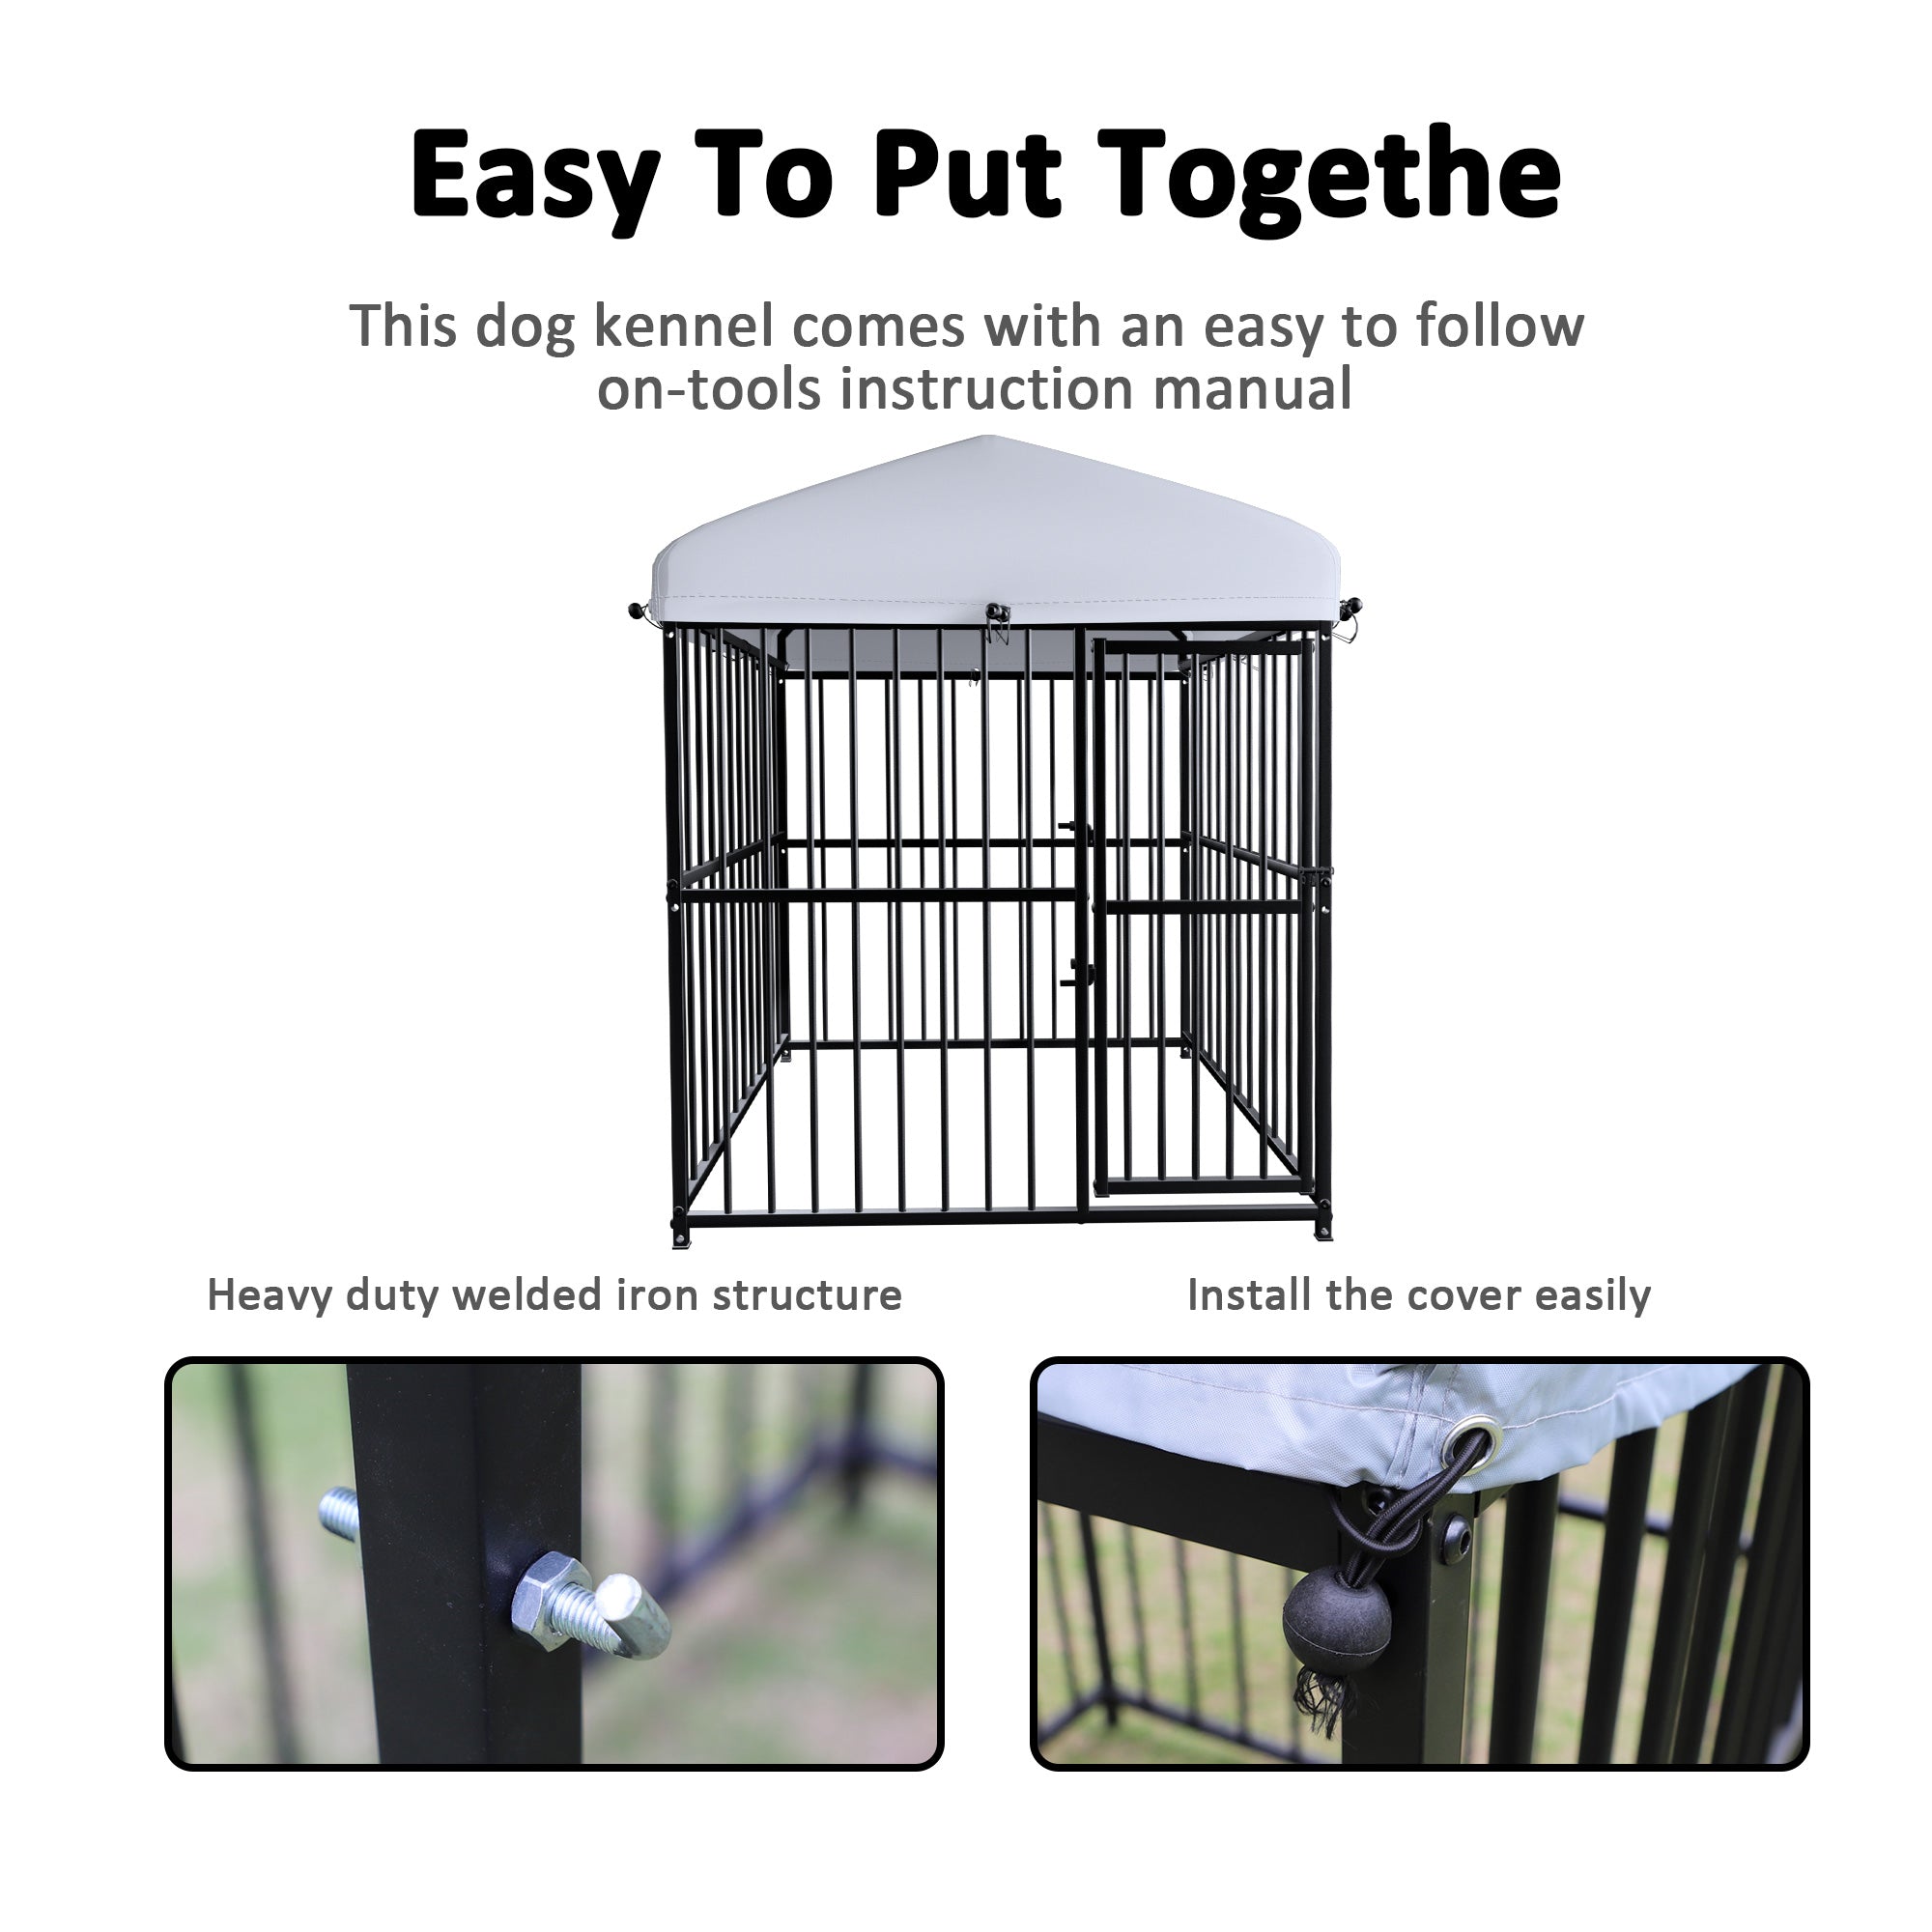 5.9'x4.9'x4.9' Large Dog Outdoor Kennel Pet Playpen with Waterproof Cover and Secure Lock, Black